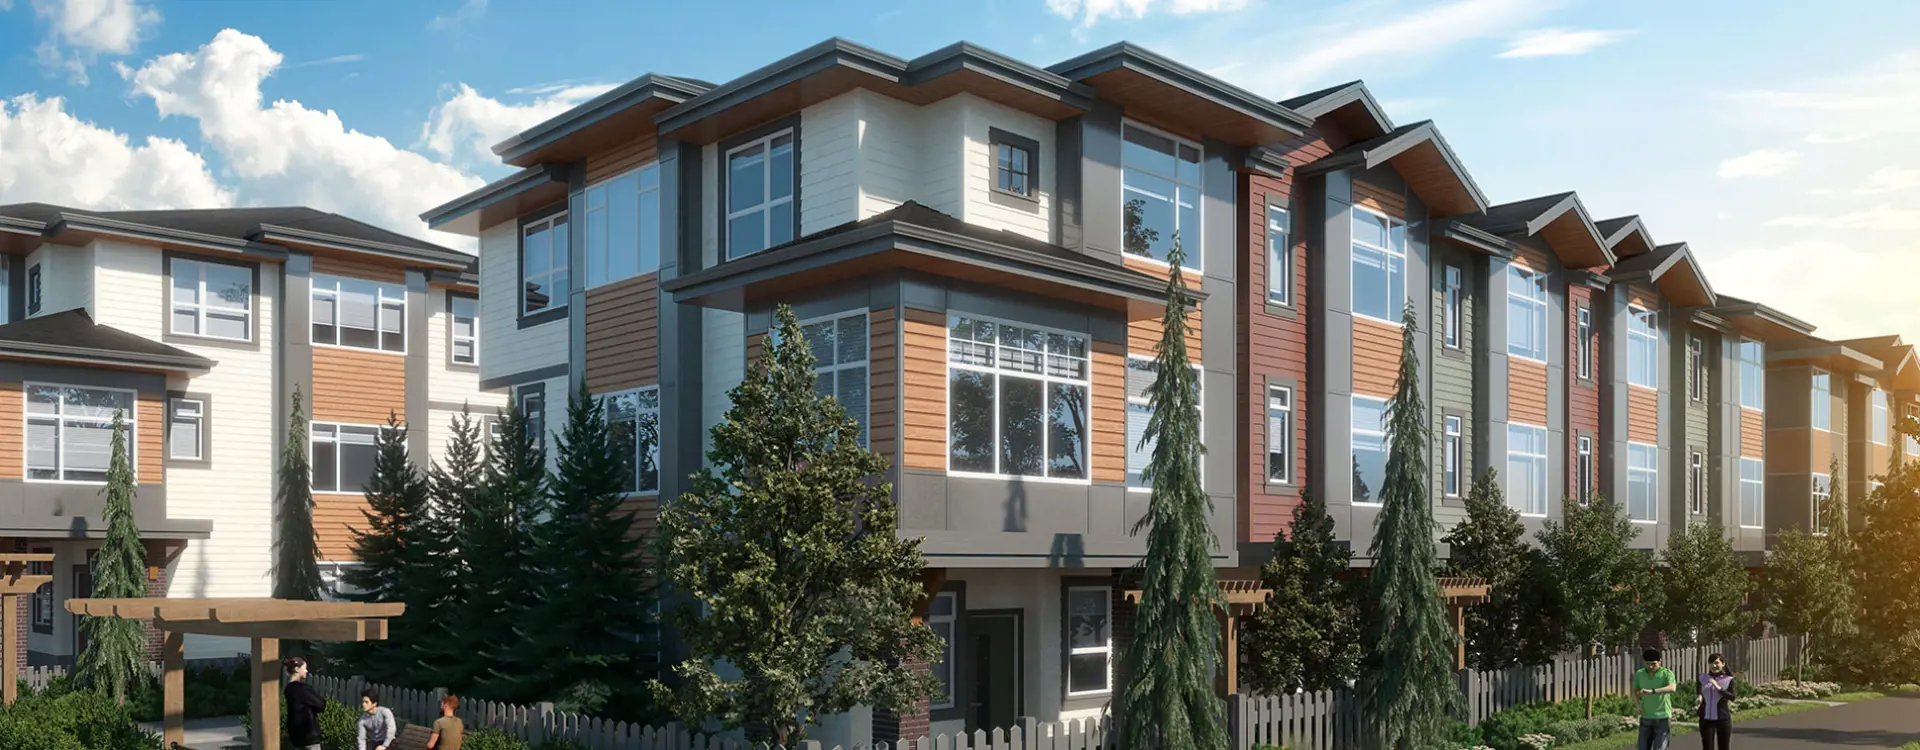 Crofton Towns located at 20763 76 Avenue, Langley, BC image